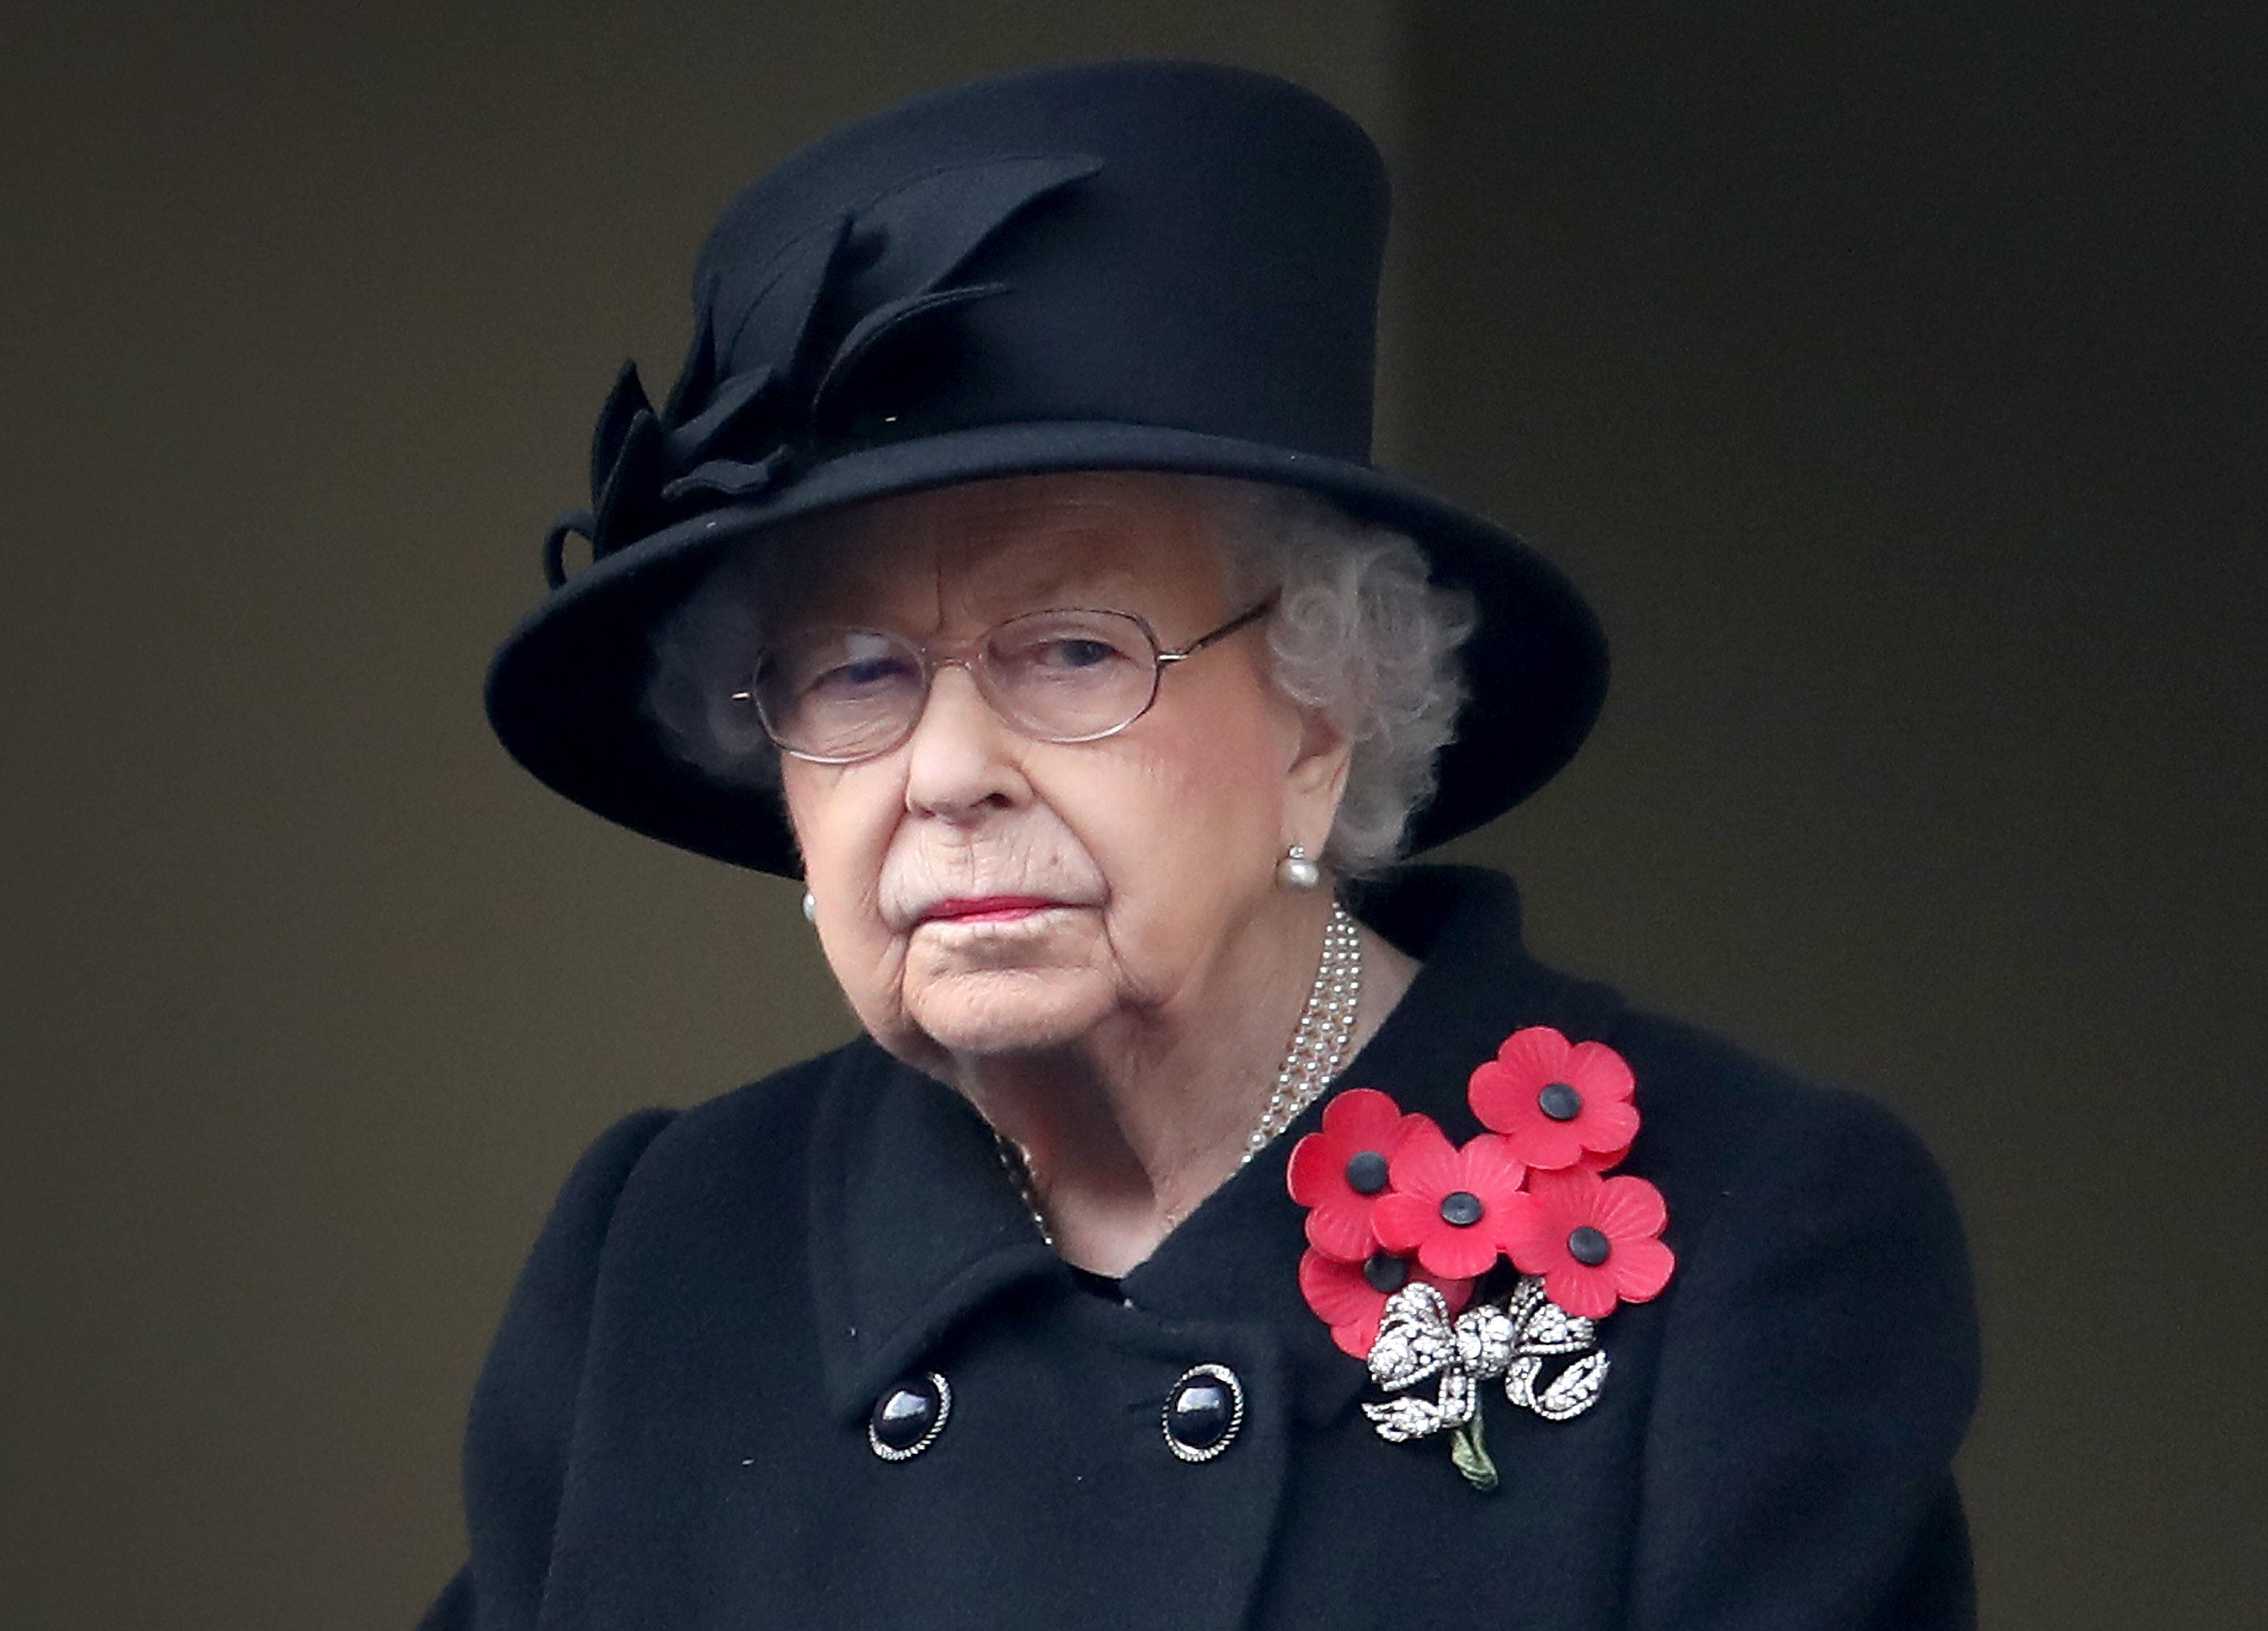 Queen Elizabeth at the Service of Remembrance at the Cenotaph  in November 2020 | Photo: Getty Images